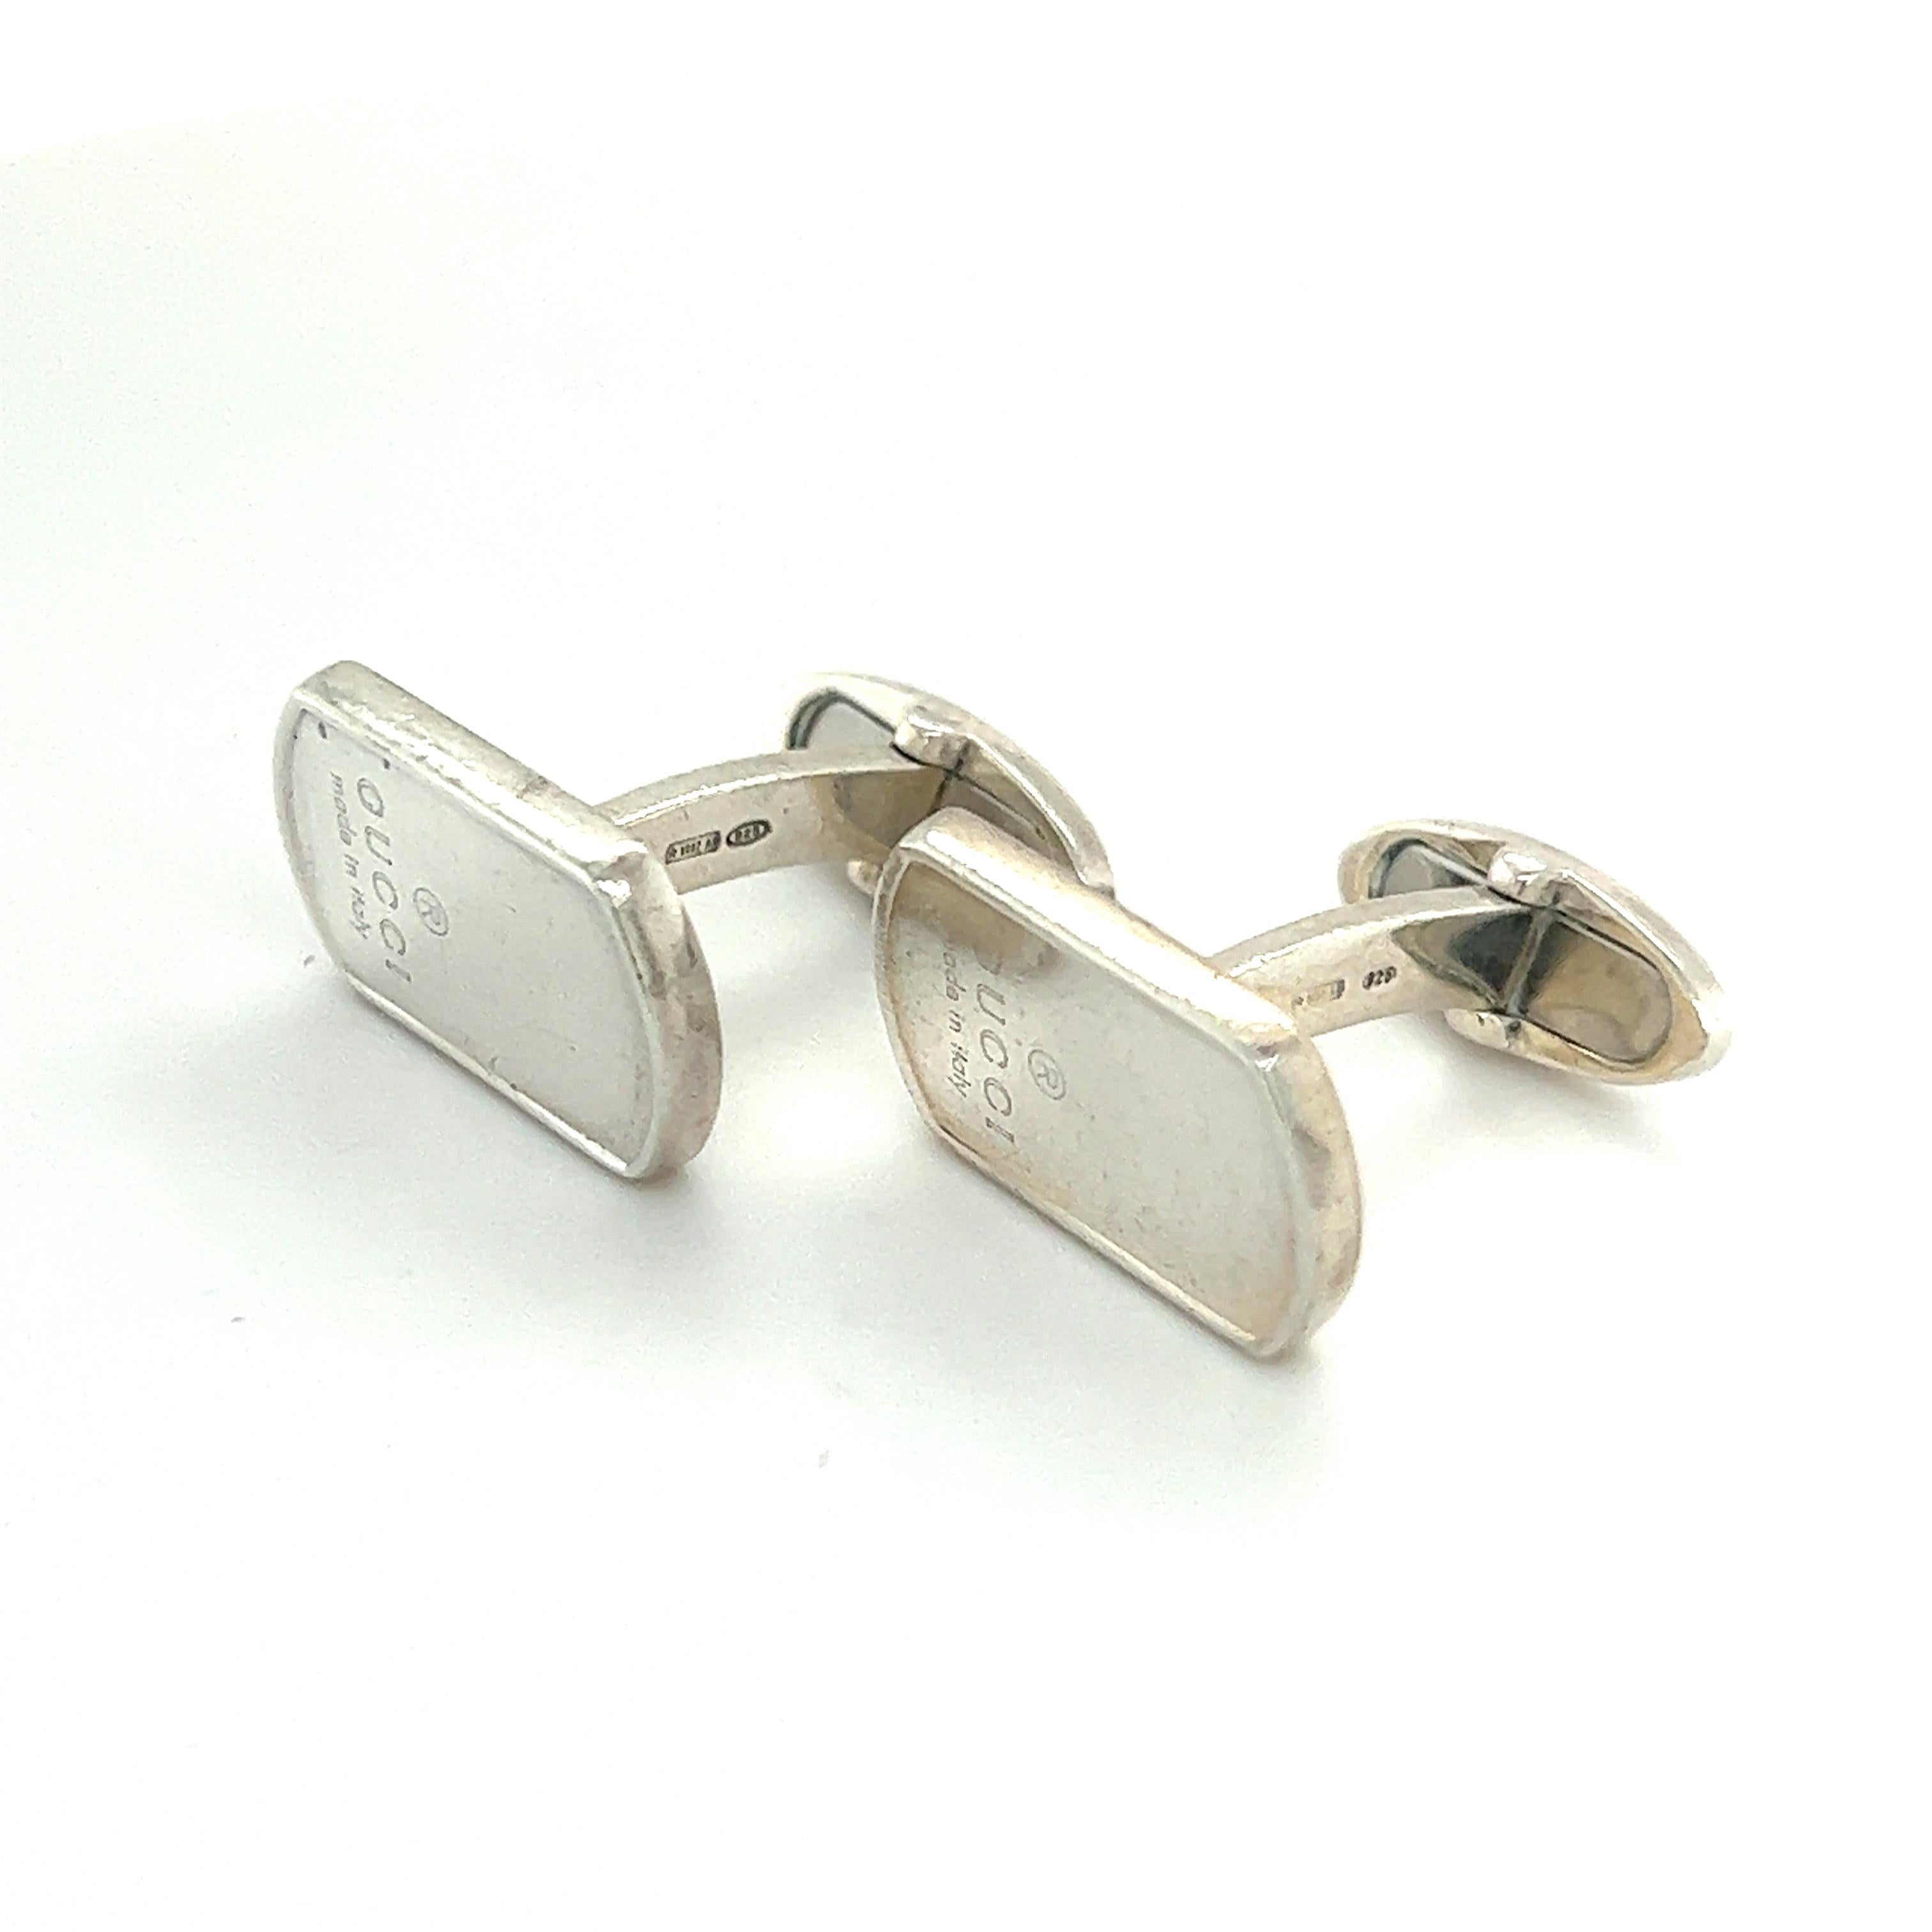 Authentic Gucci Estate Mens Cufflinks Sterling Silver G10

These elegant Authentic Gucci cufflinks are made of sterling silver and have a weight of 11.4 grams.

MADE IN ITALY

TRUSTED SELLER SINCE 2002

PLEASE SEE OUR HUNDREDS OF POSITIVE FEEDBACKS